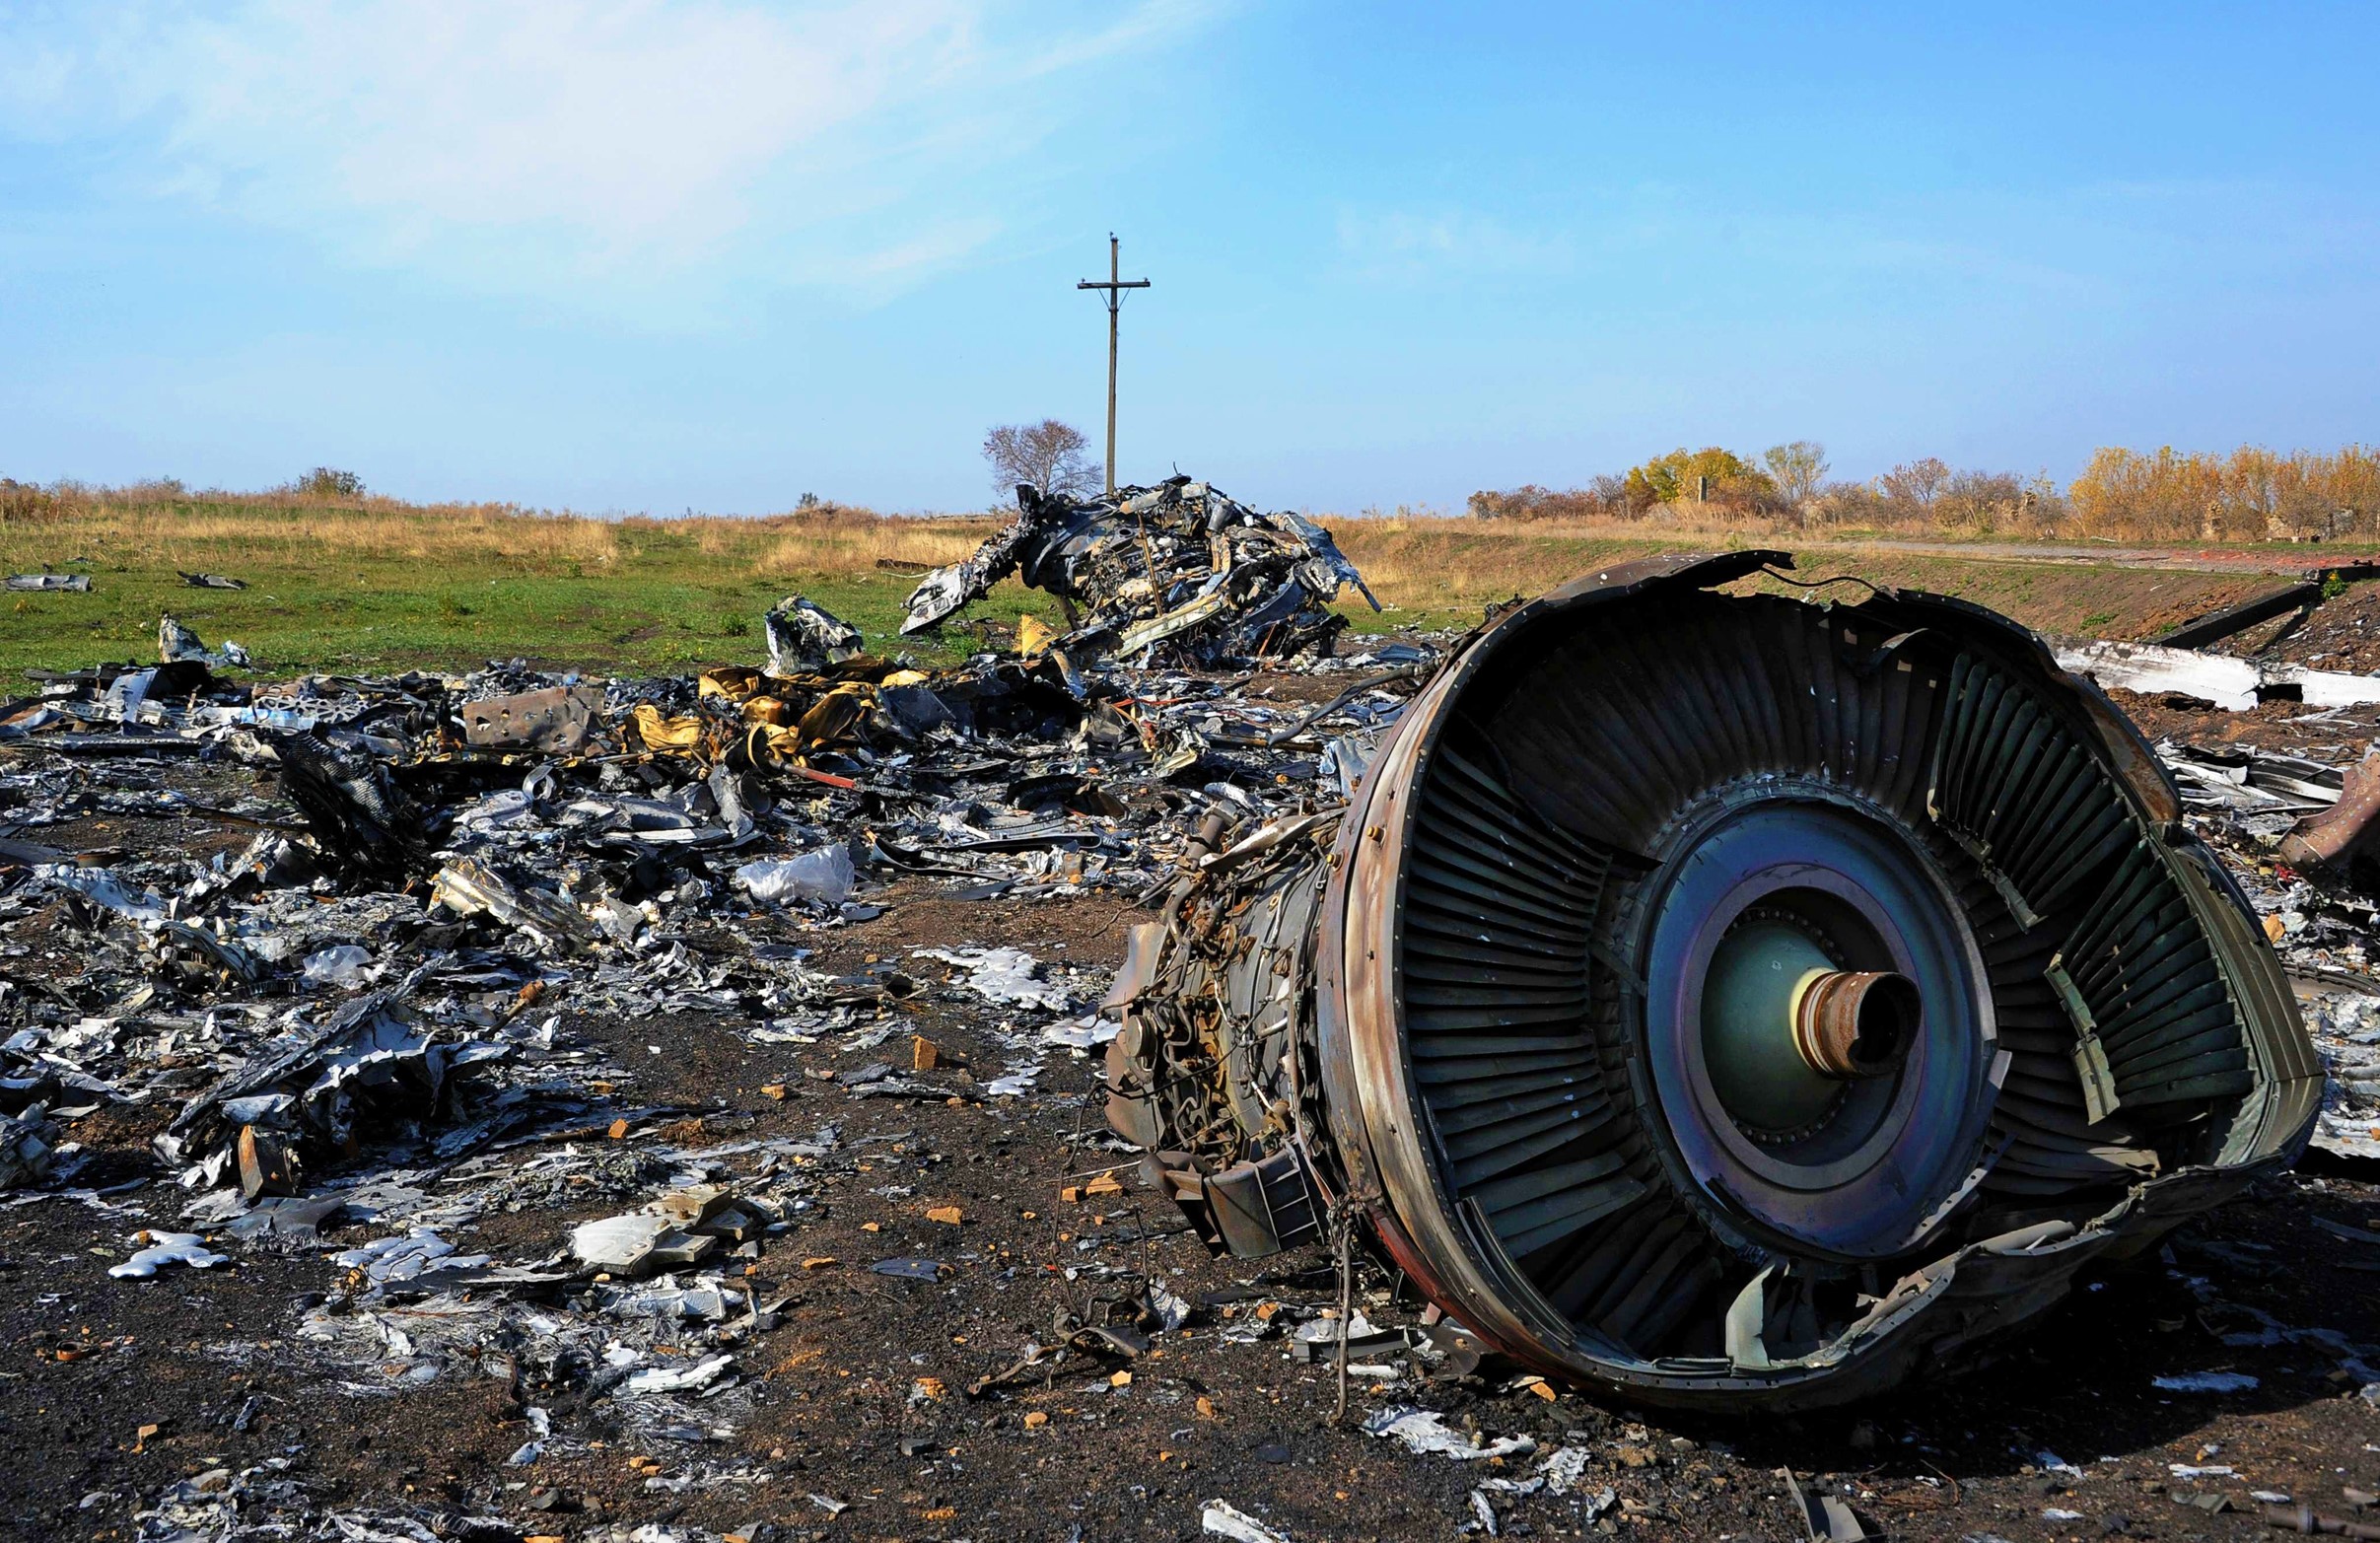 Malaysia  Airlines  Flight  MH17  -  Australian  and  Dutch  governments  go  to  ICAO  with  legal  case  against  Russia  for  alleged  role  in  downing it !